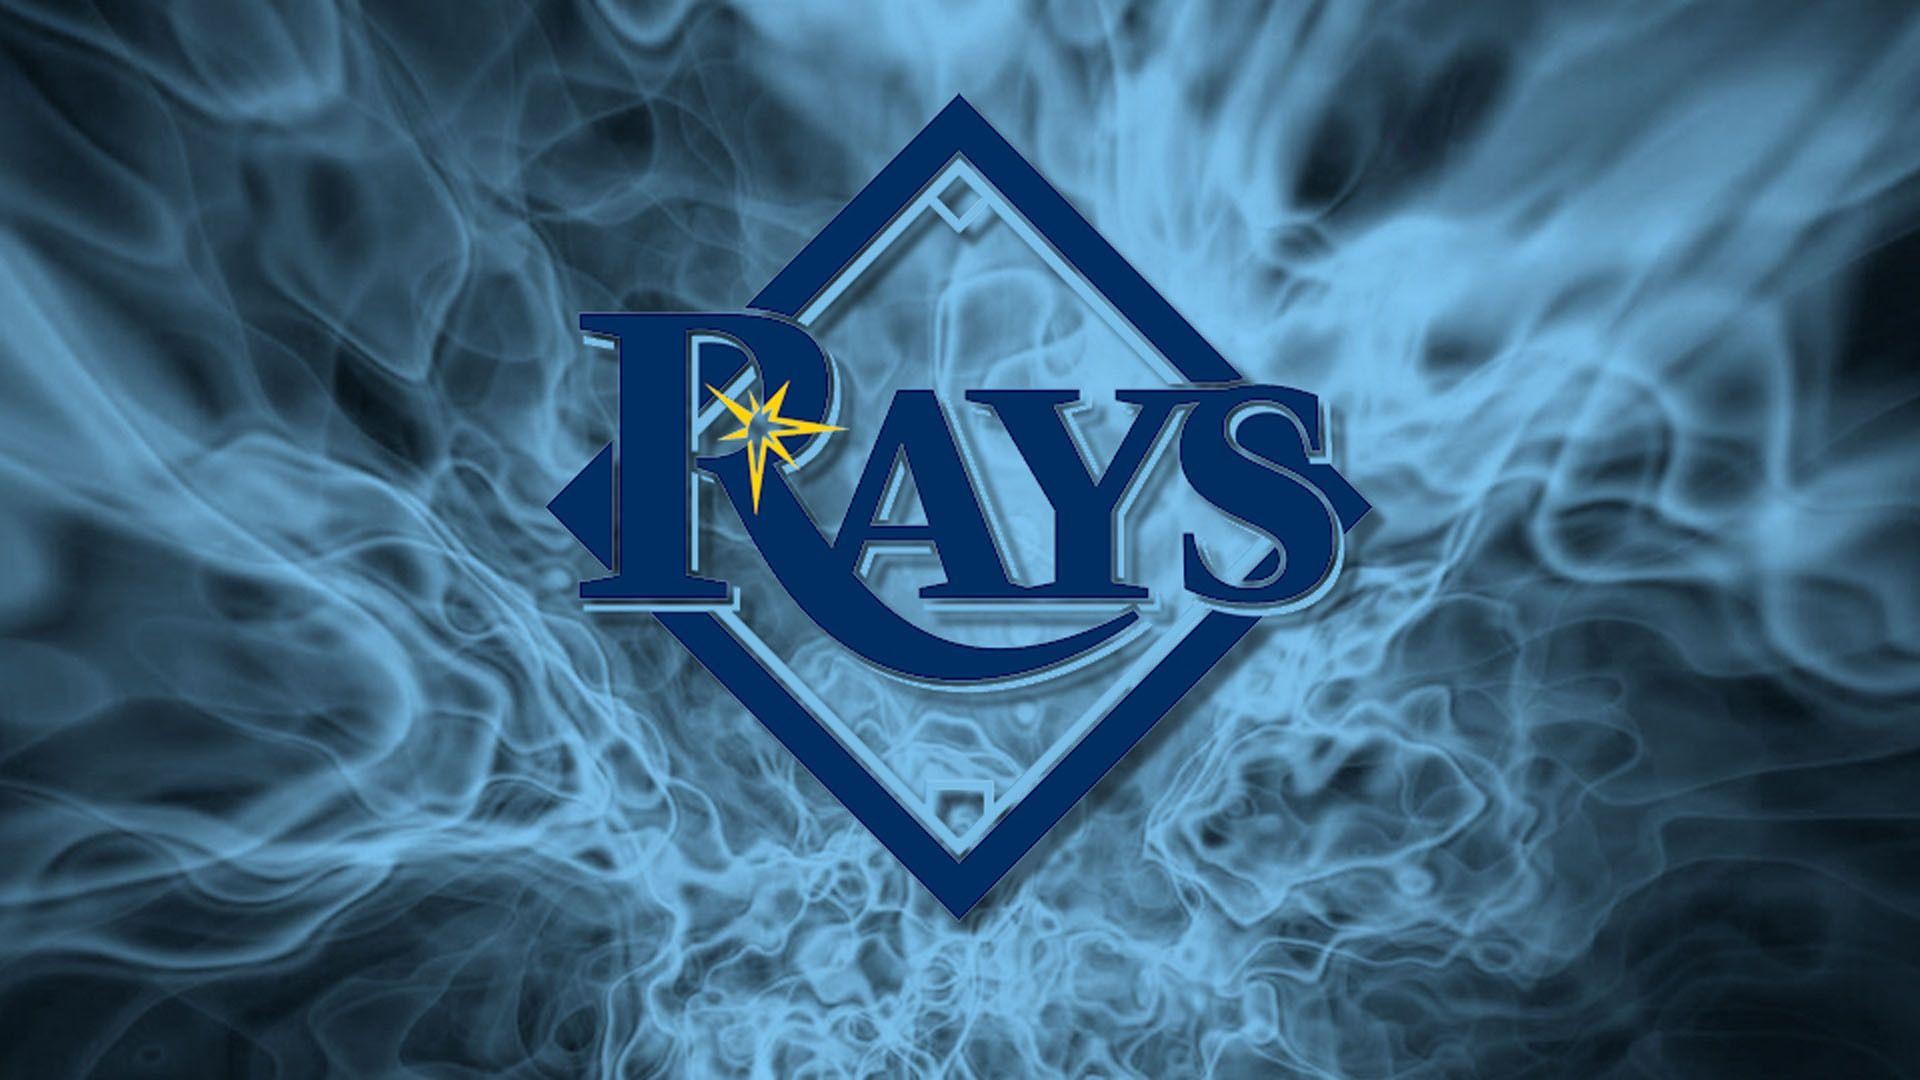 1920x1080 Tampa Bay Rays Wallpapers Images Photos Pictures Backgrounds